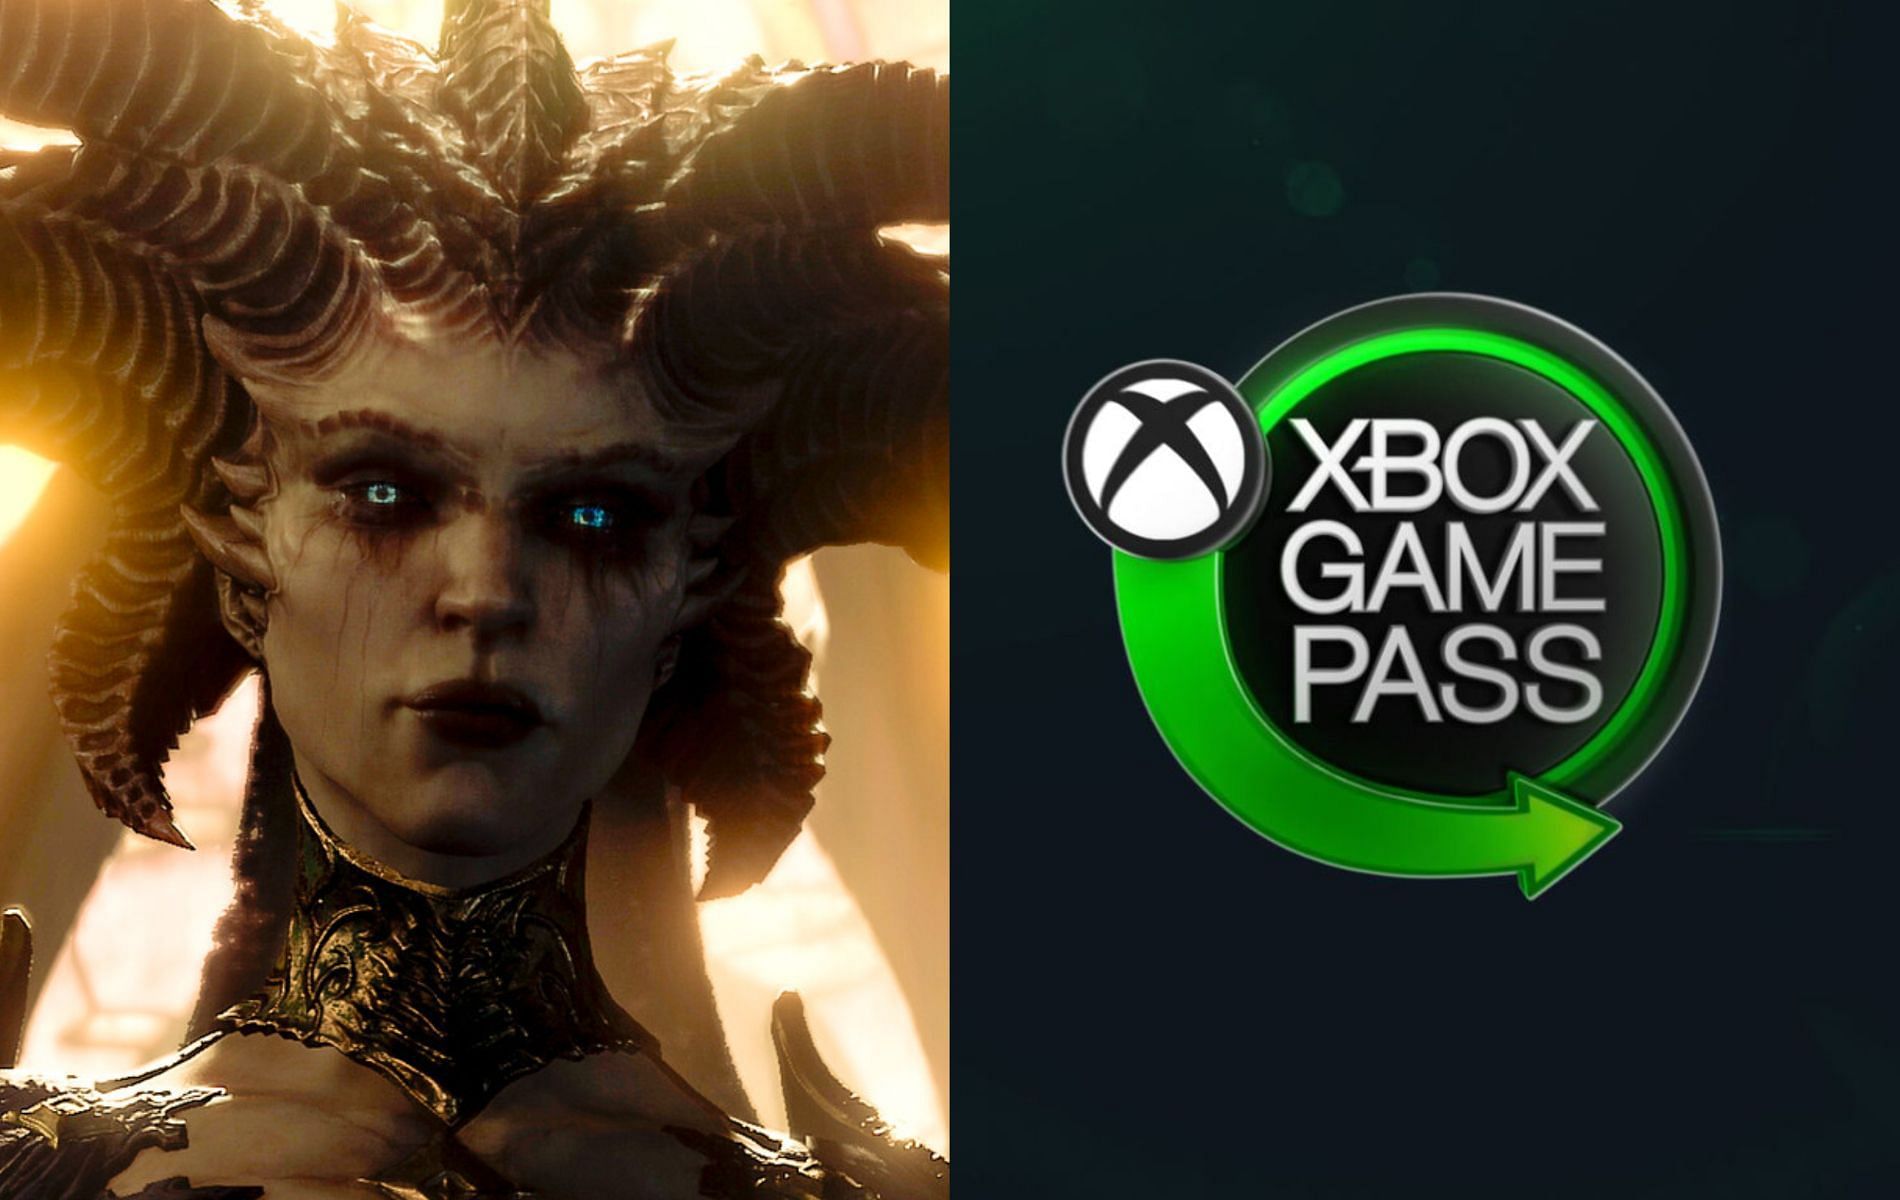 Diablo 4 currently has no plans to come to Xbox or PC Game Pass (Images via Diablo 4 and Xbox)